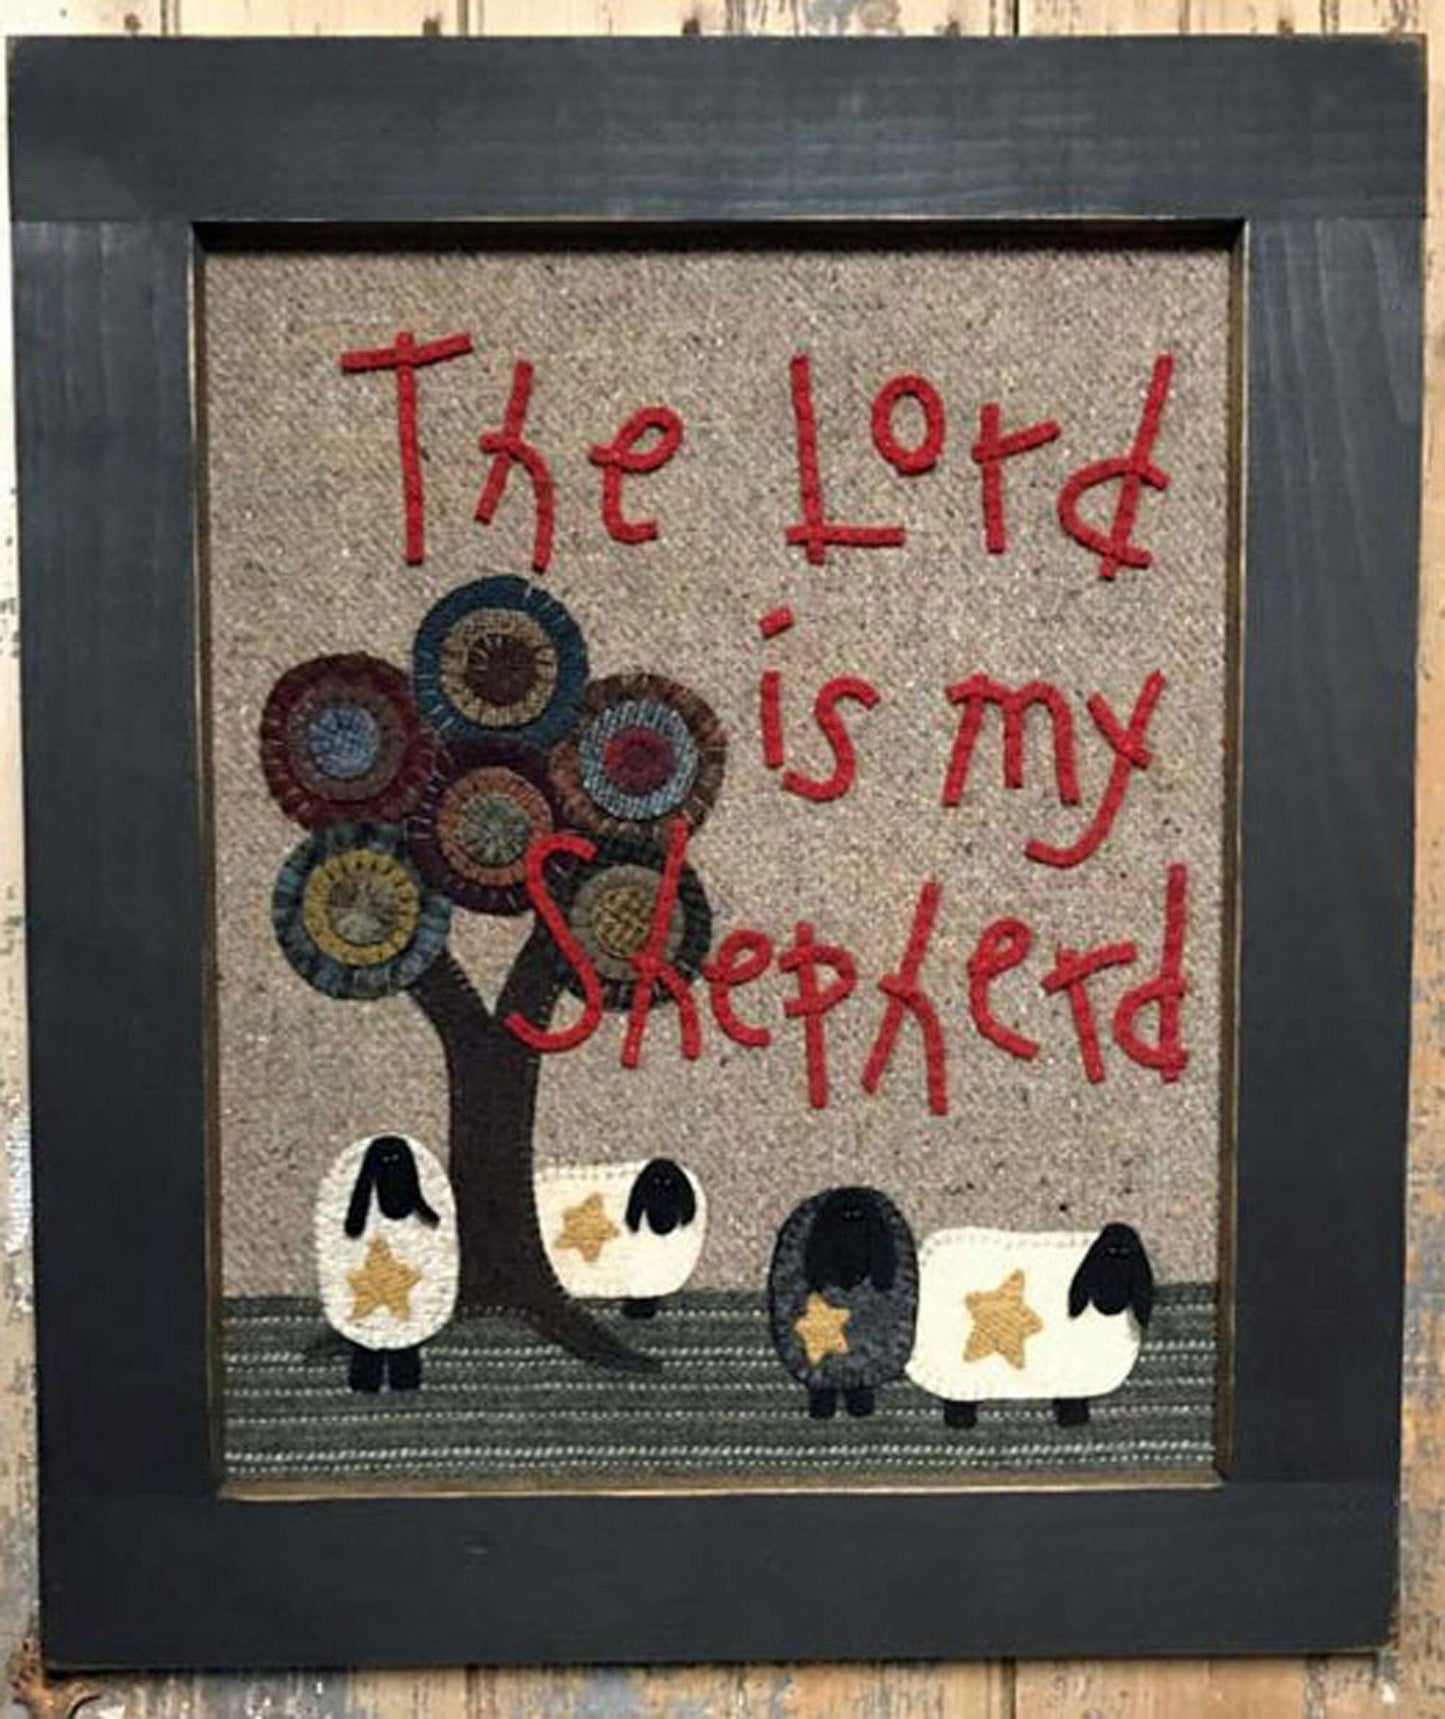 THE LORD is my SHEPHERD Pattern - All About Ewe Wool Shop